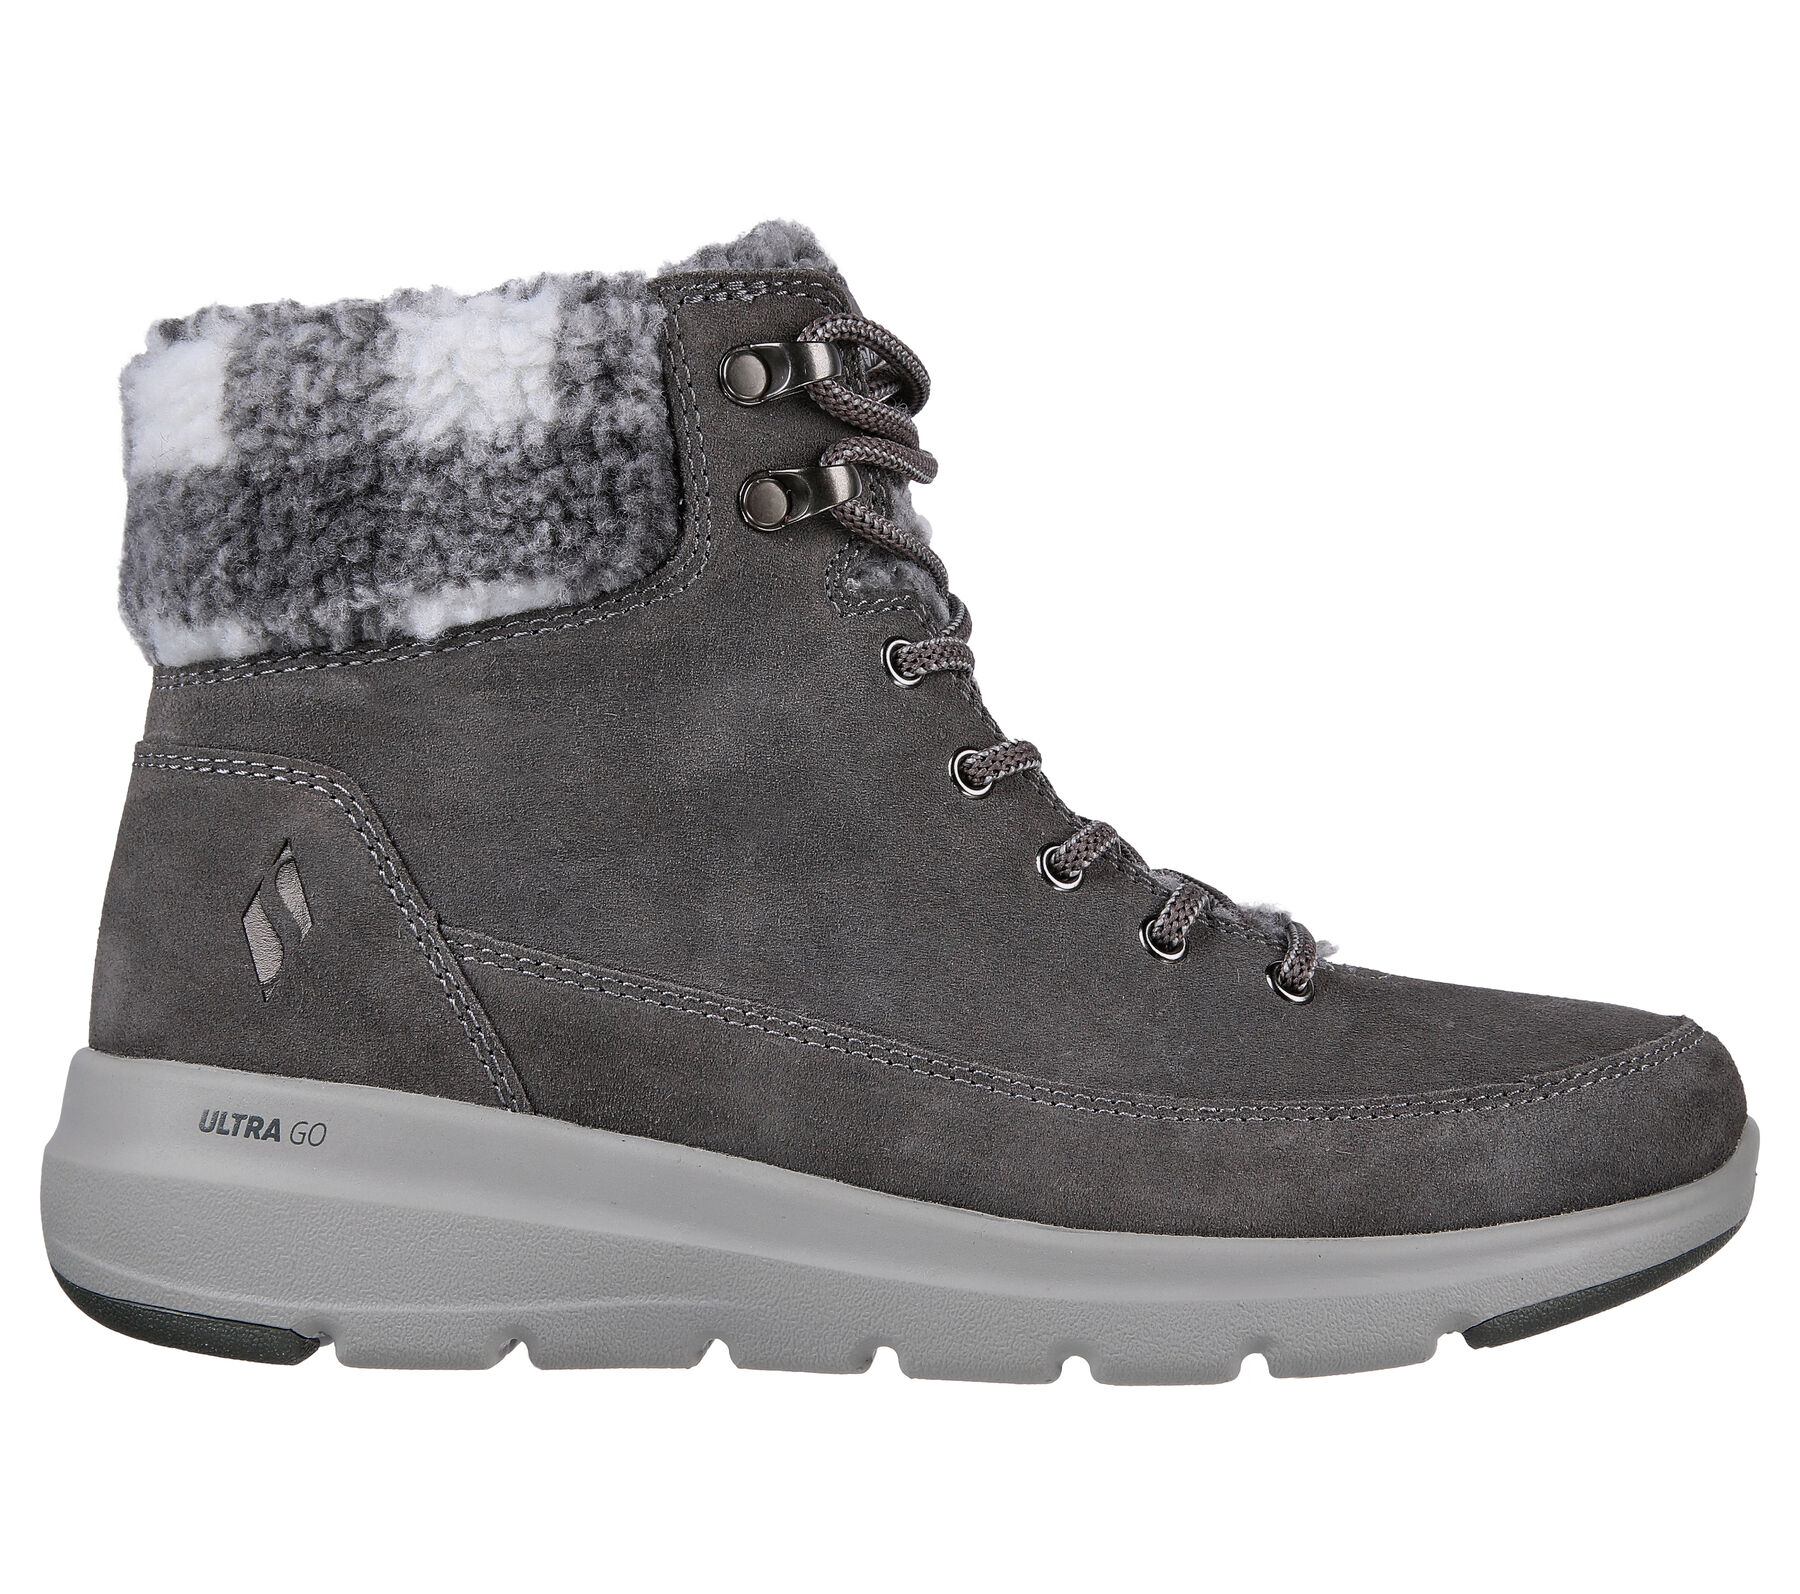 Shop the Skechers On the GO Glacial Ultra - Timber | SKECHERS